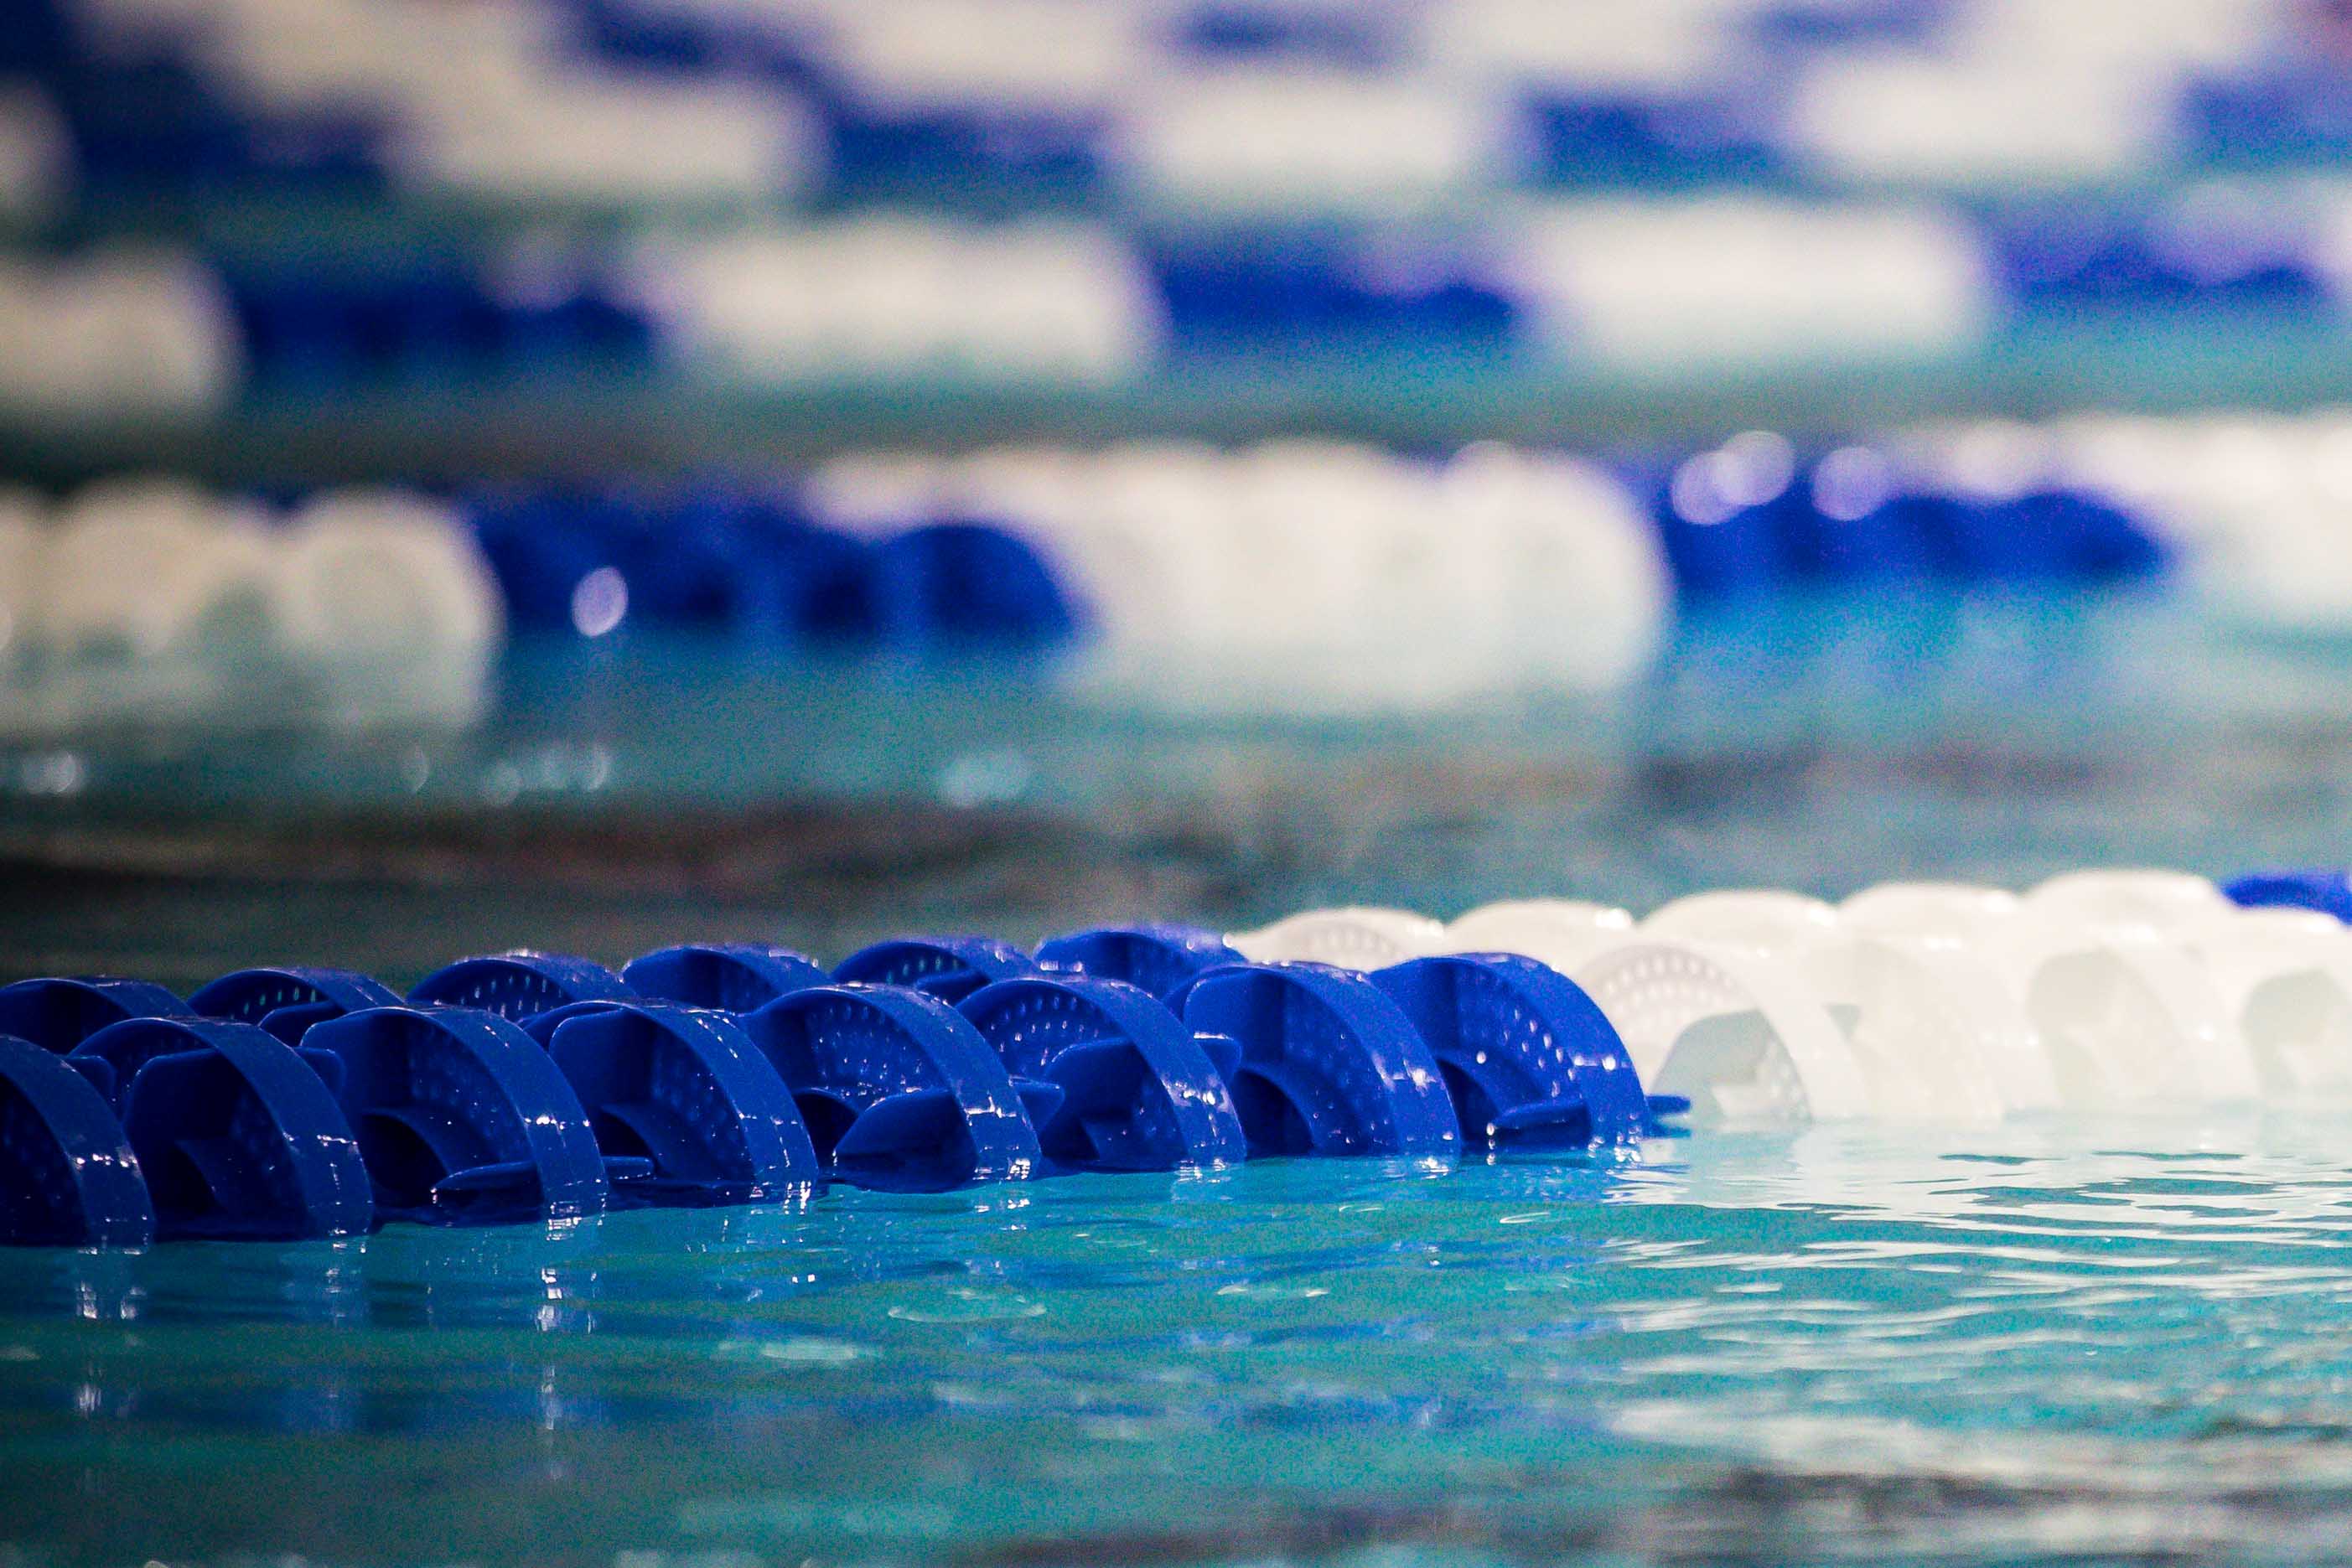 The Science Behind Competitor's Pool Lane Lines